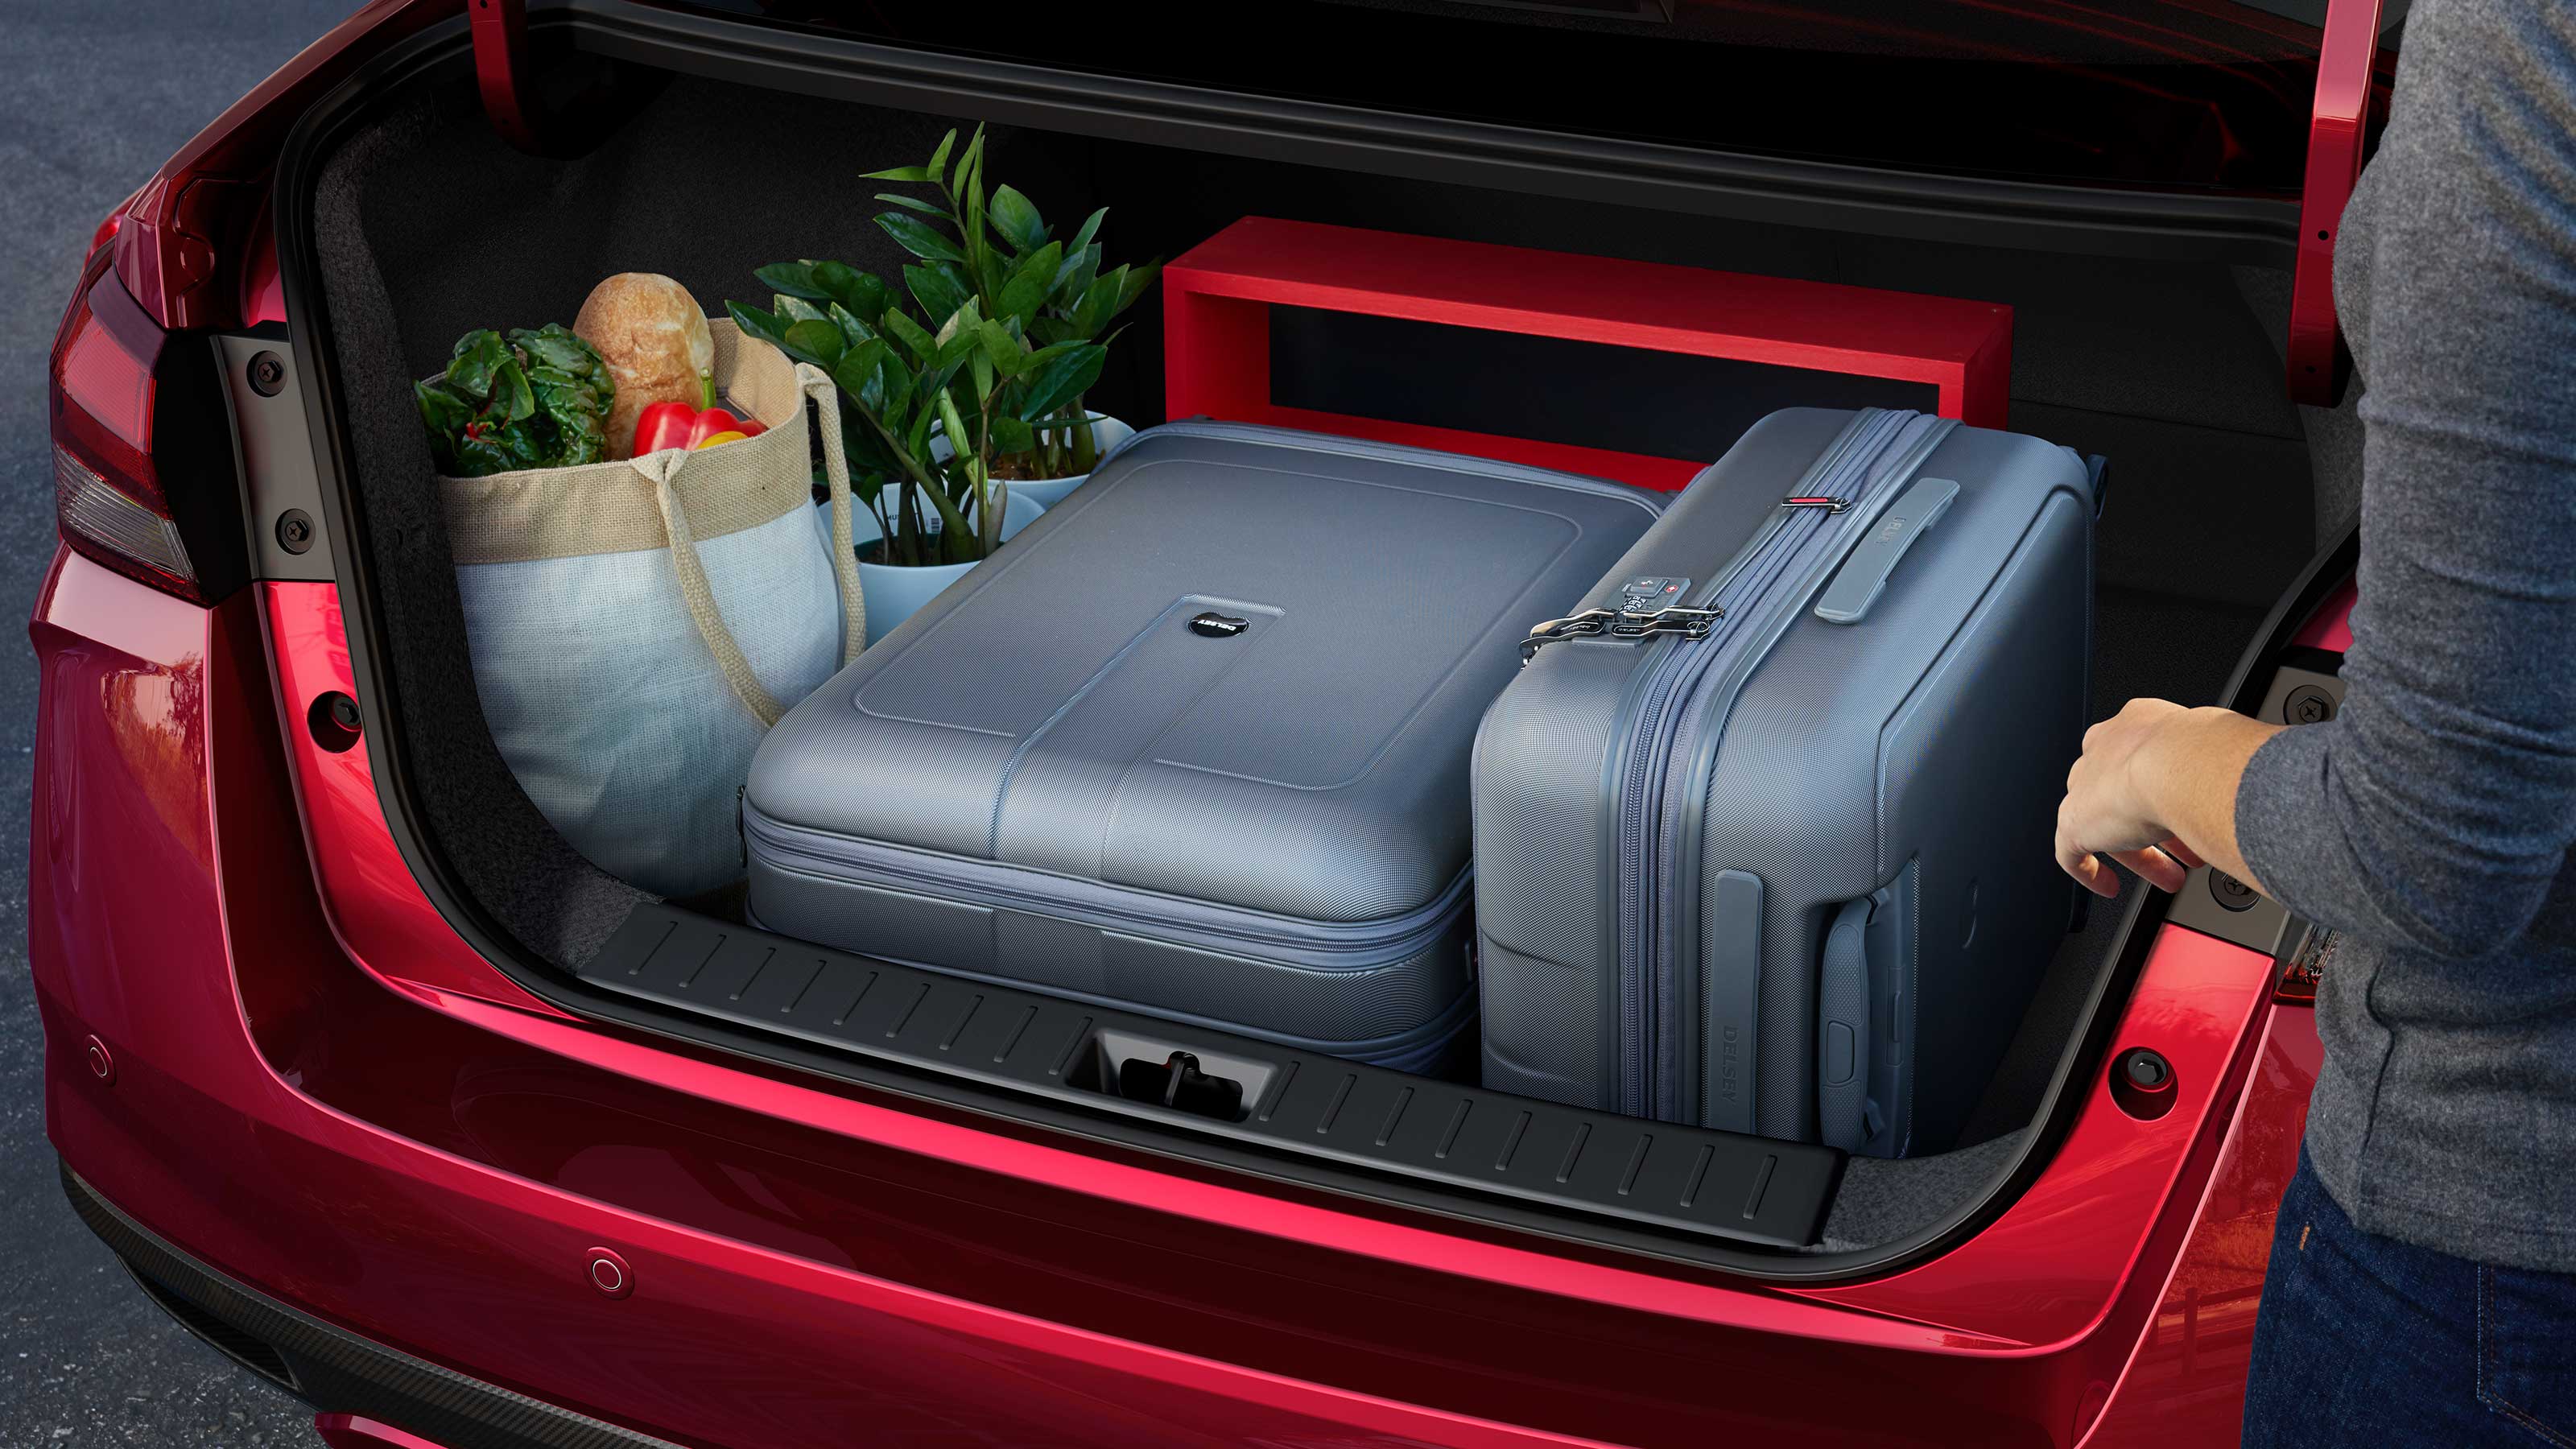 Nissan SUNNY trunk space